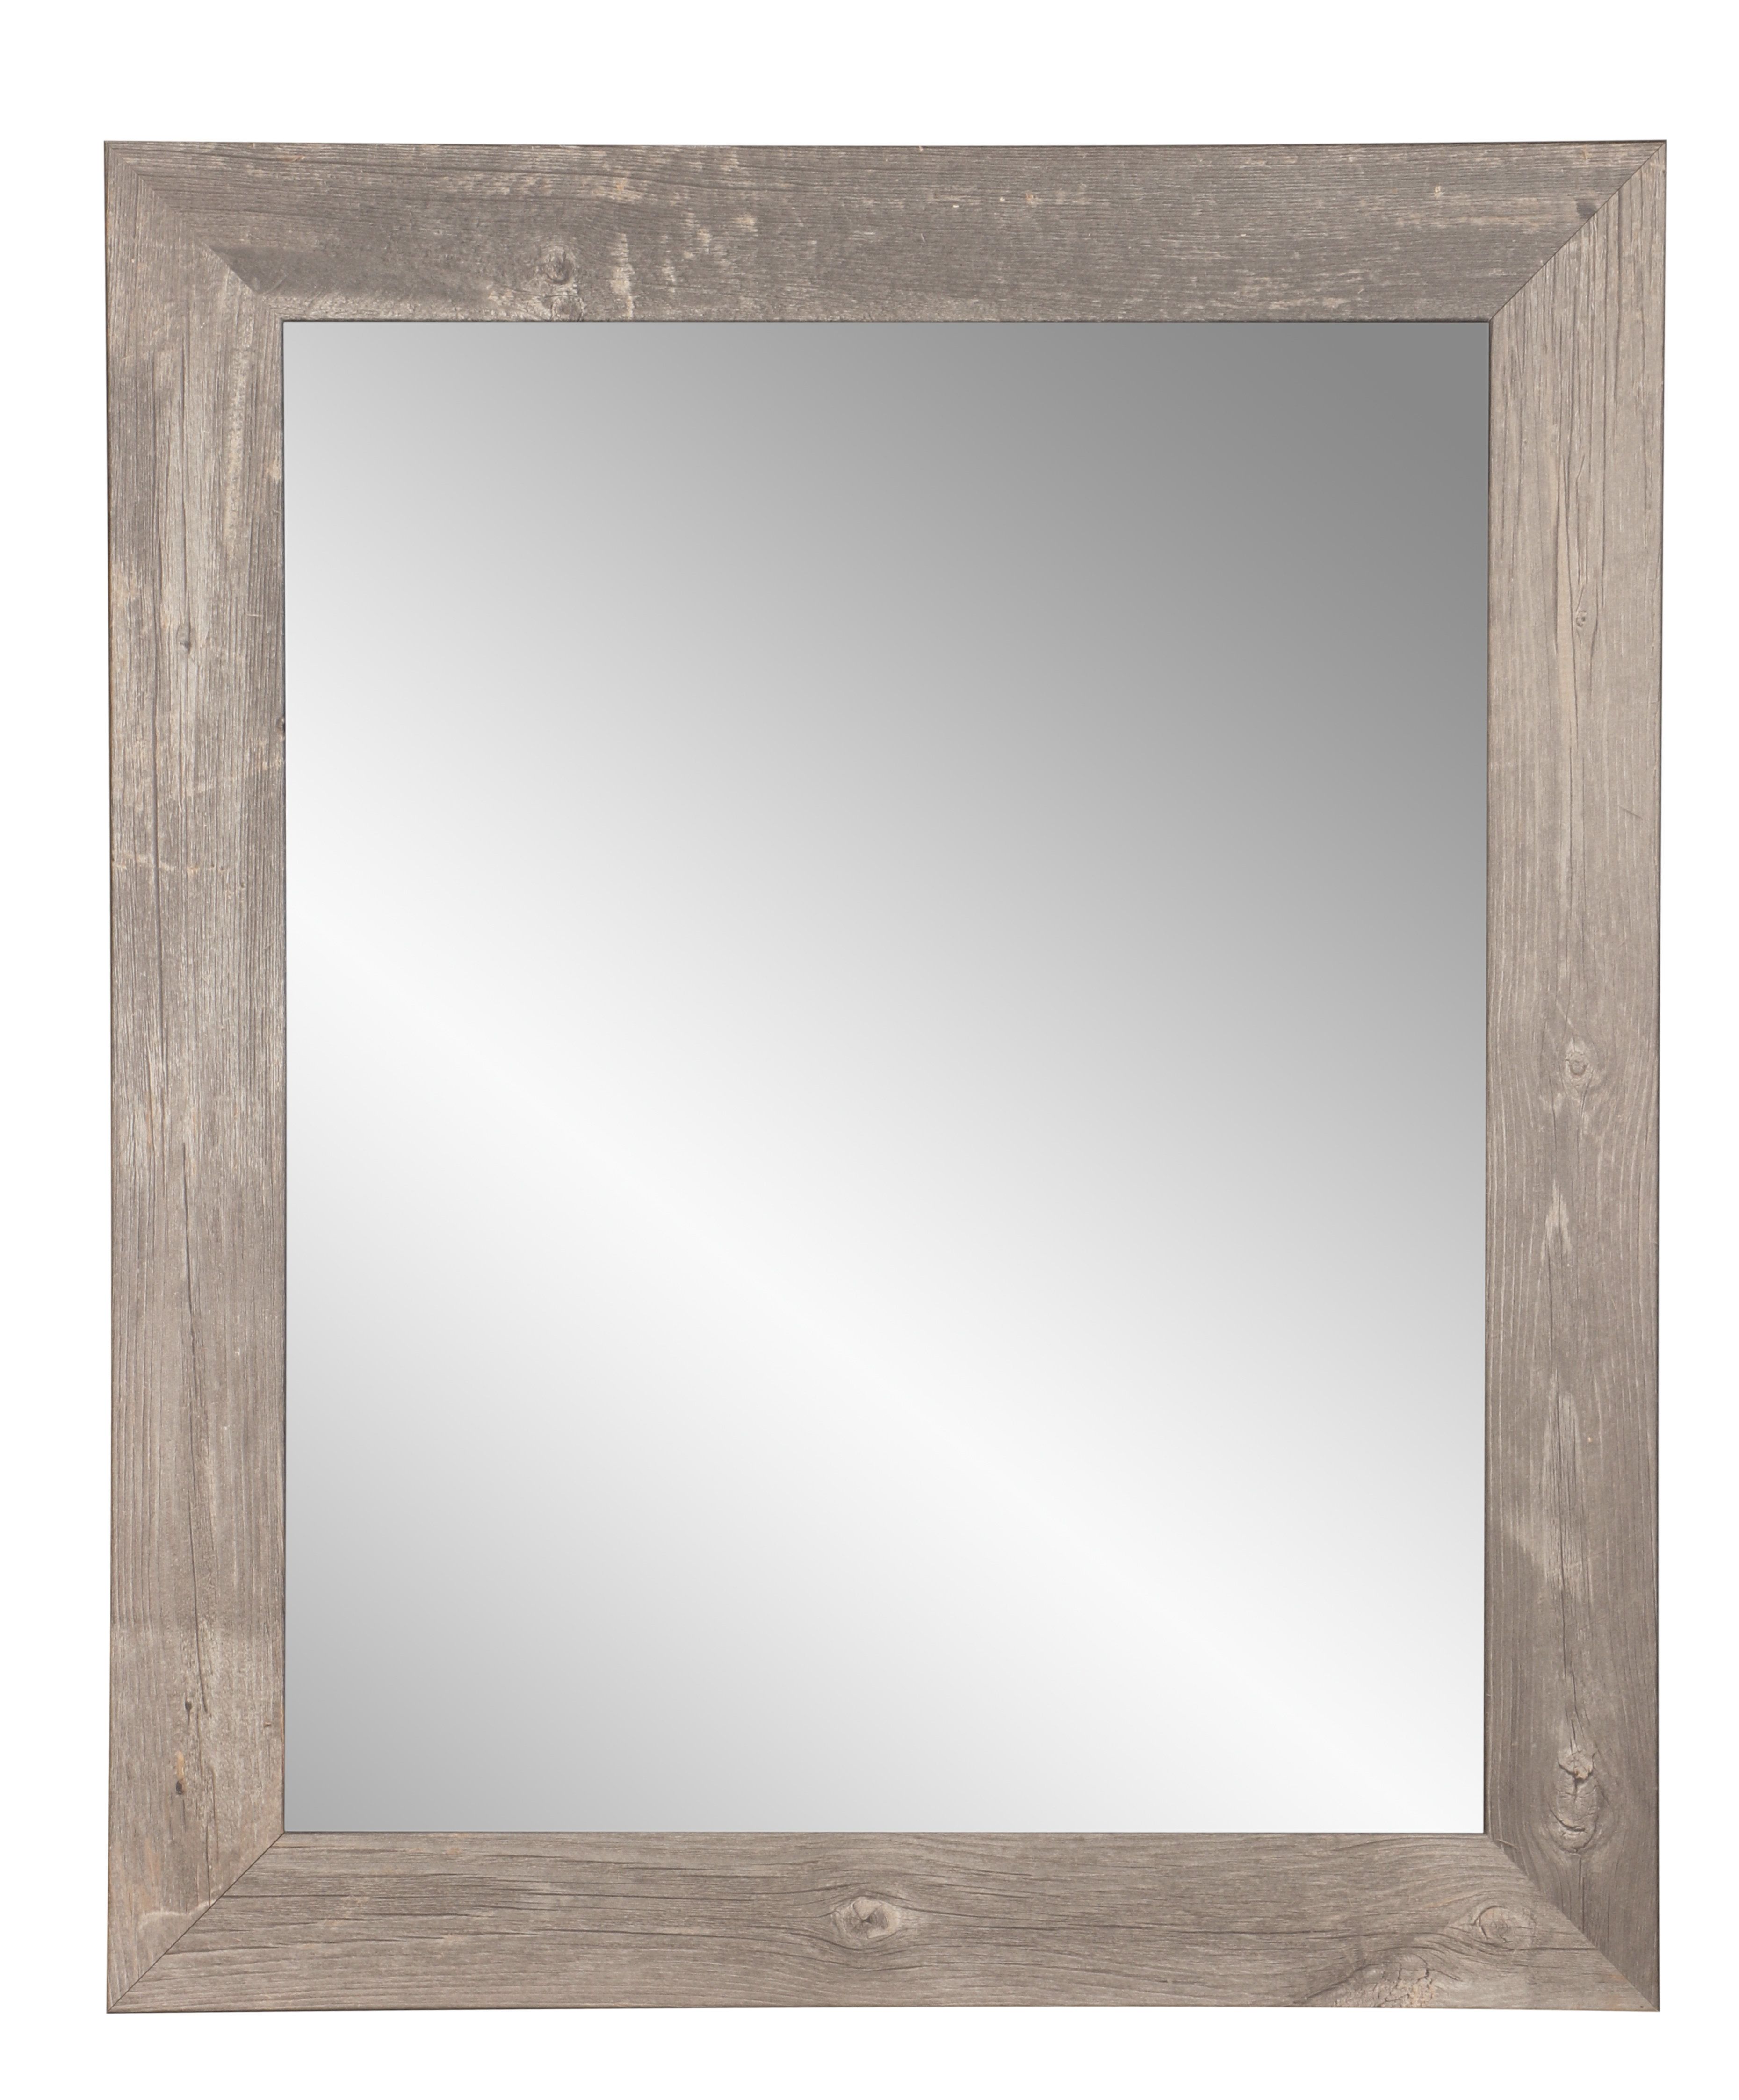 Glynis Wild West Accent Mirror & Reviews | Allmodern Throughout Glynis Wild West Accent Mirrors (View 1 of 20)